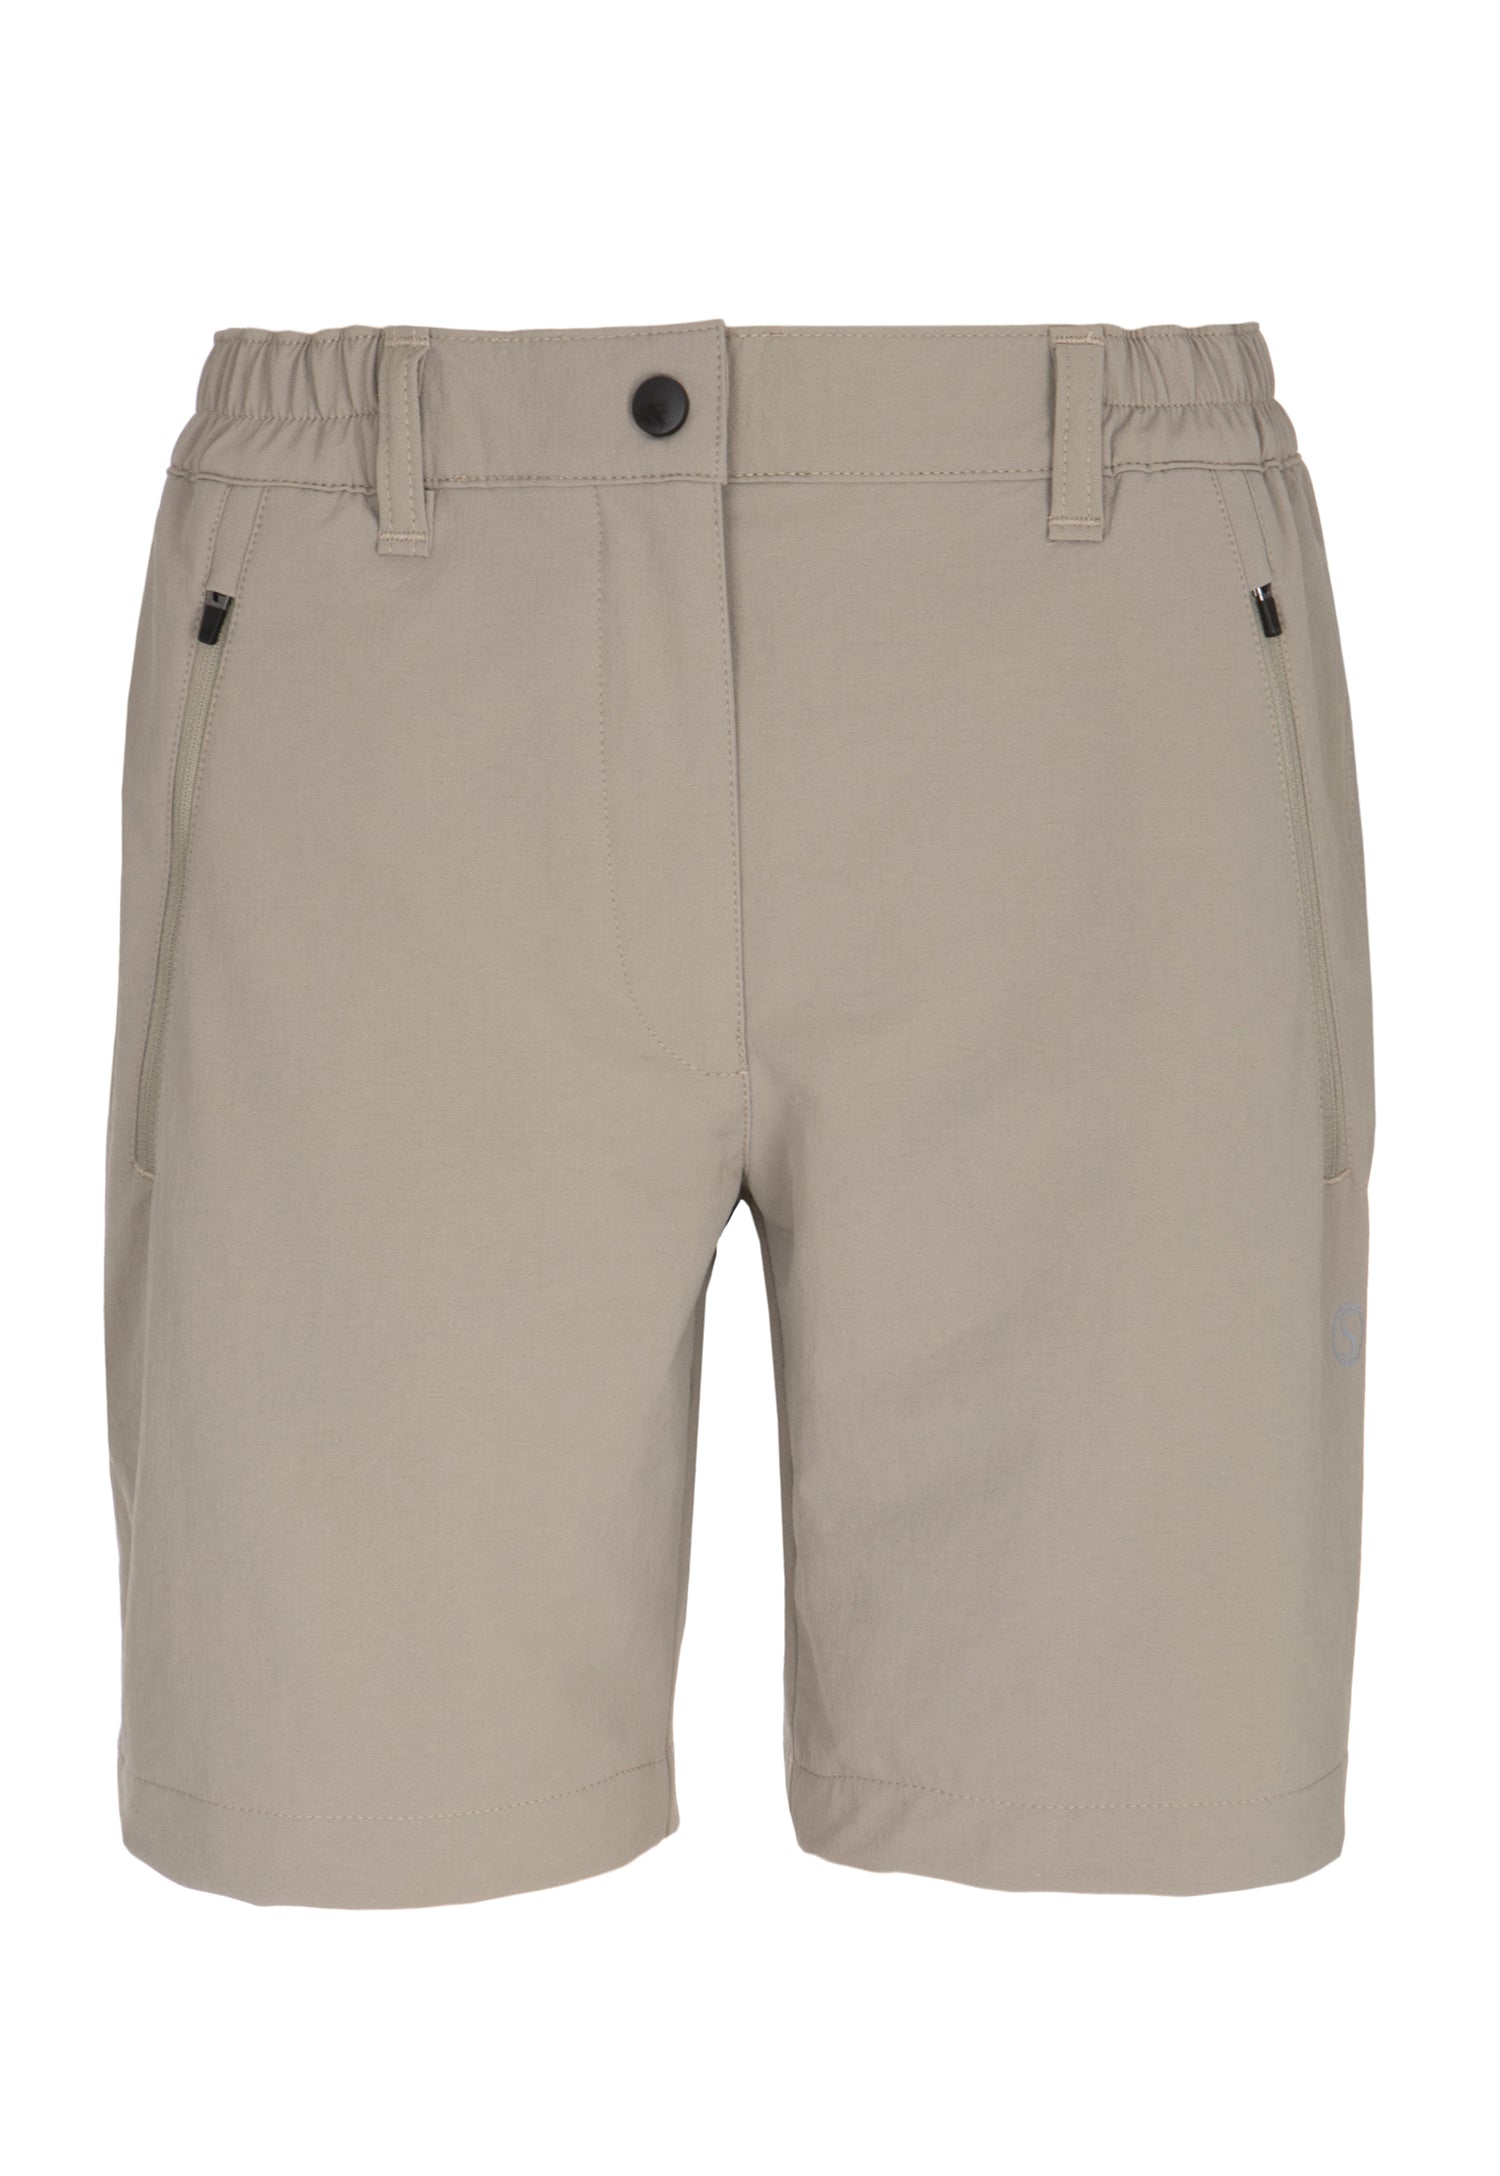 Bowness Shorts - Sand